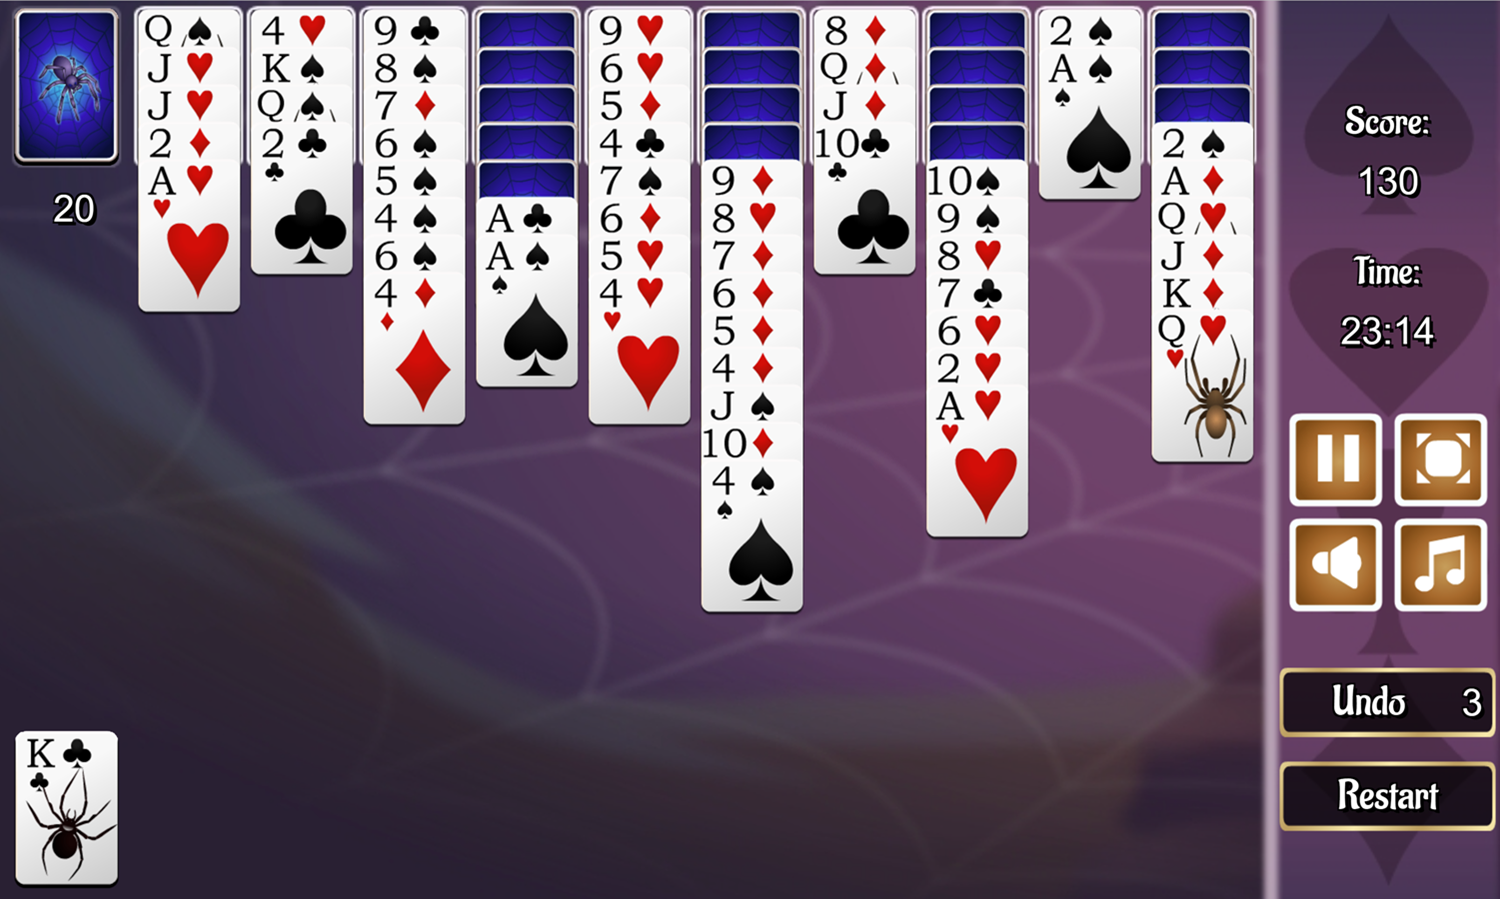 4 Suits Spider Solitaire Game Scored Screenshot.